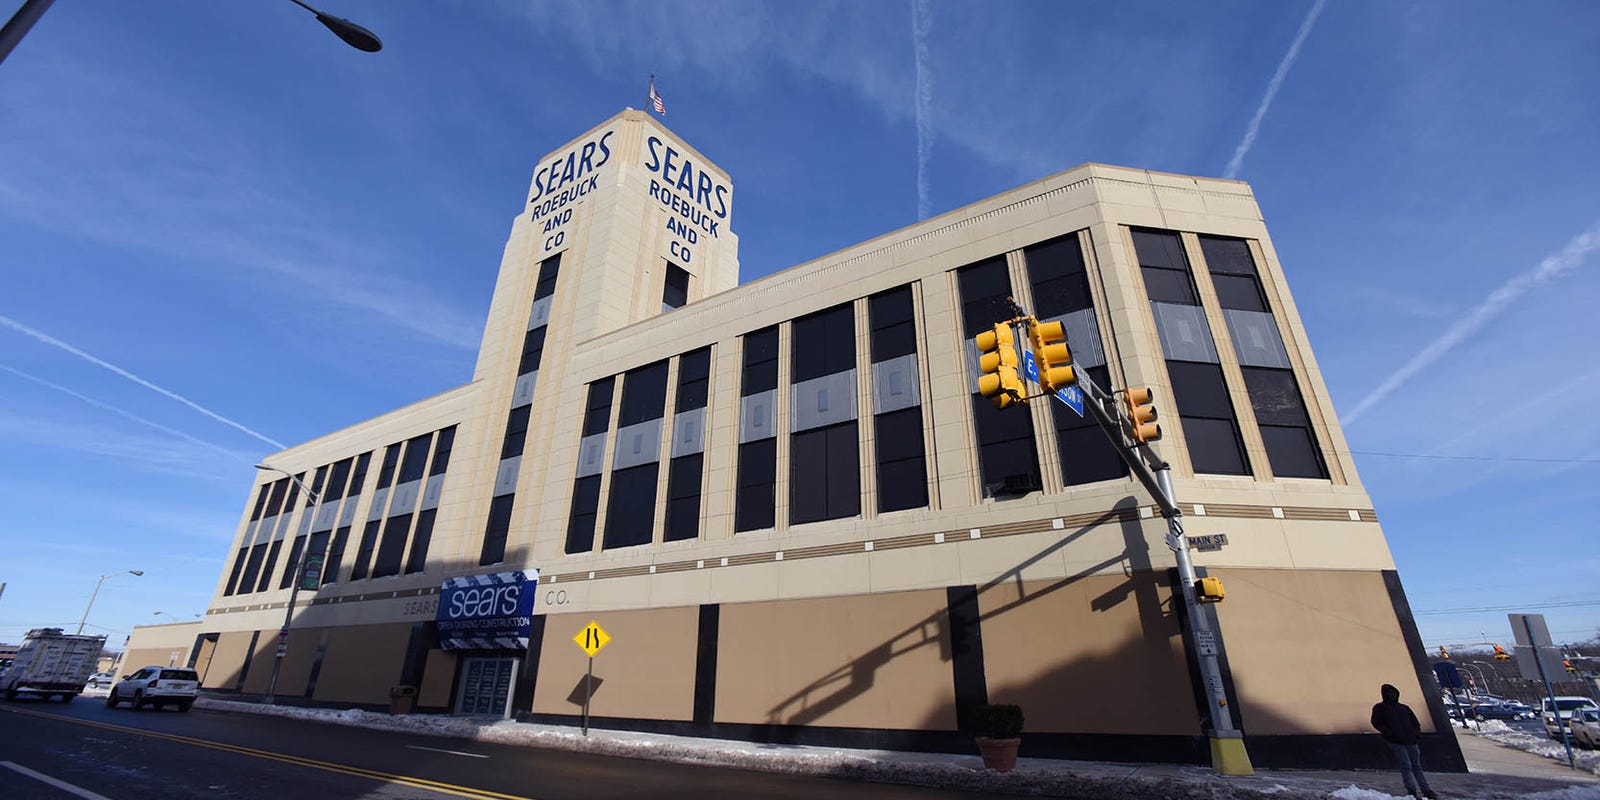 Bid Offered To Buy Sears After Announced Closing Of 80 More Stores